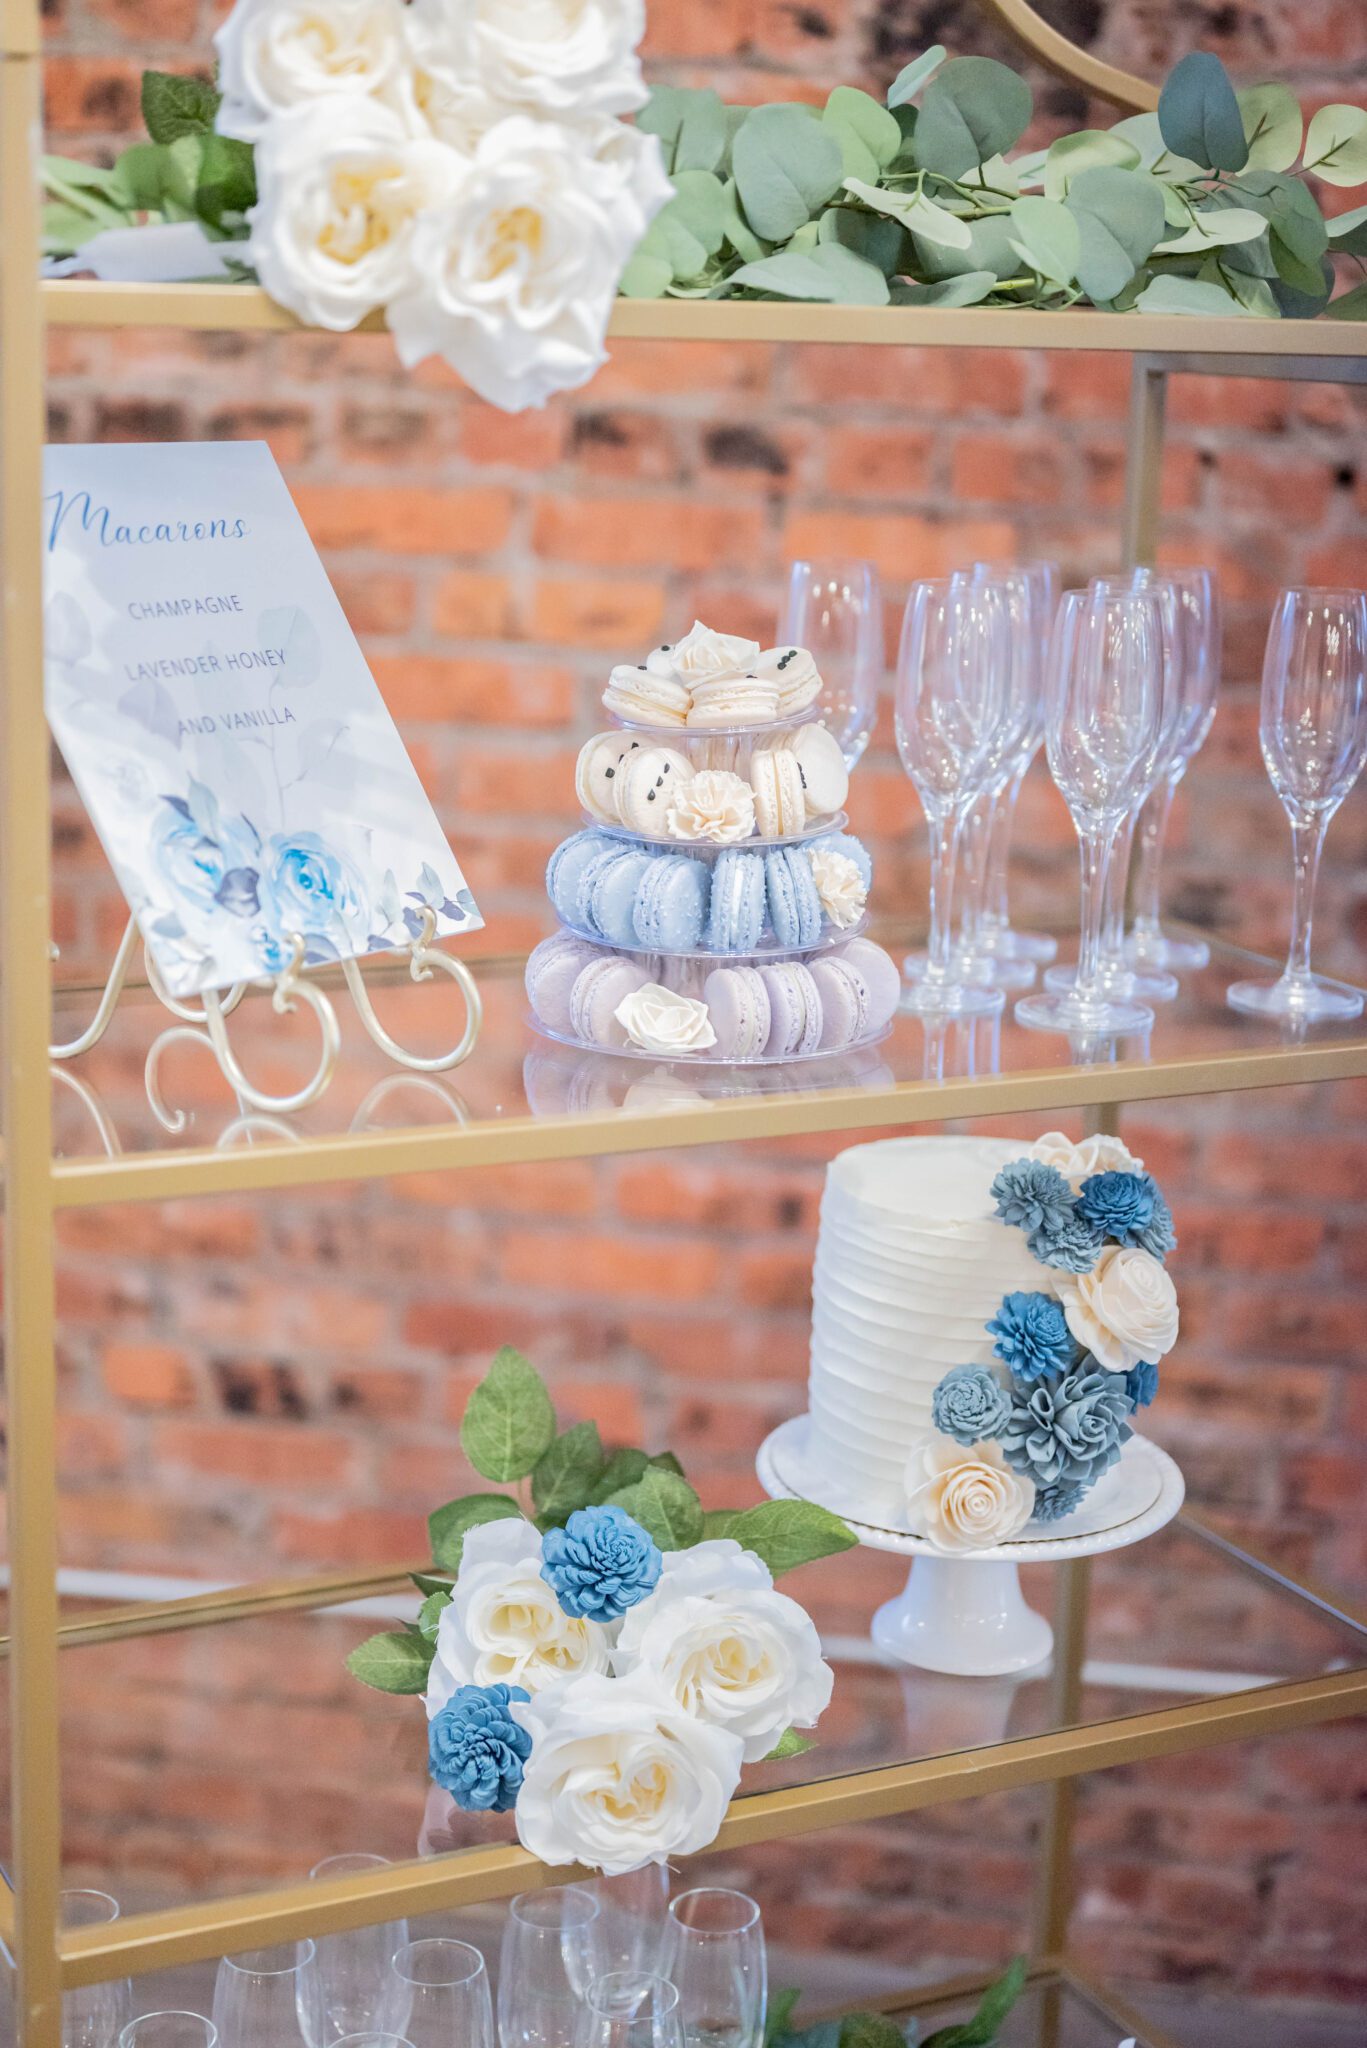 tiered dessert stand displaying light purple, baby blue and creamy white french macarons, white wedding cake decorated with white and blue florals, custom dessert sign with blue roses and grey-toned on vintage white easel, gold frame and glass shelf dessert and champagne display ideas